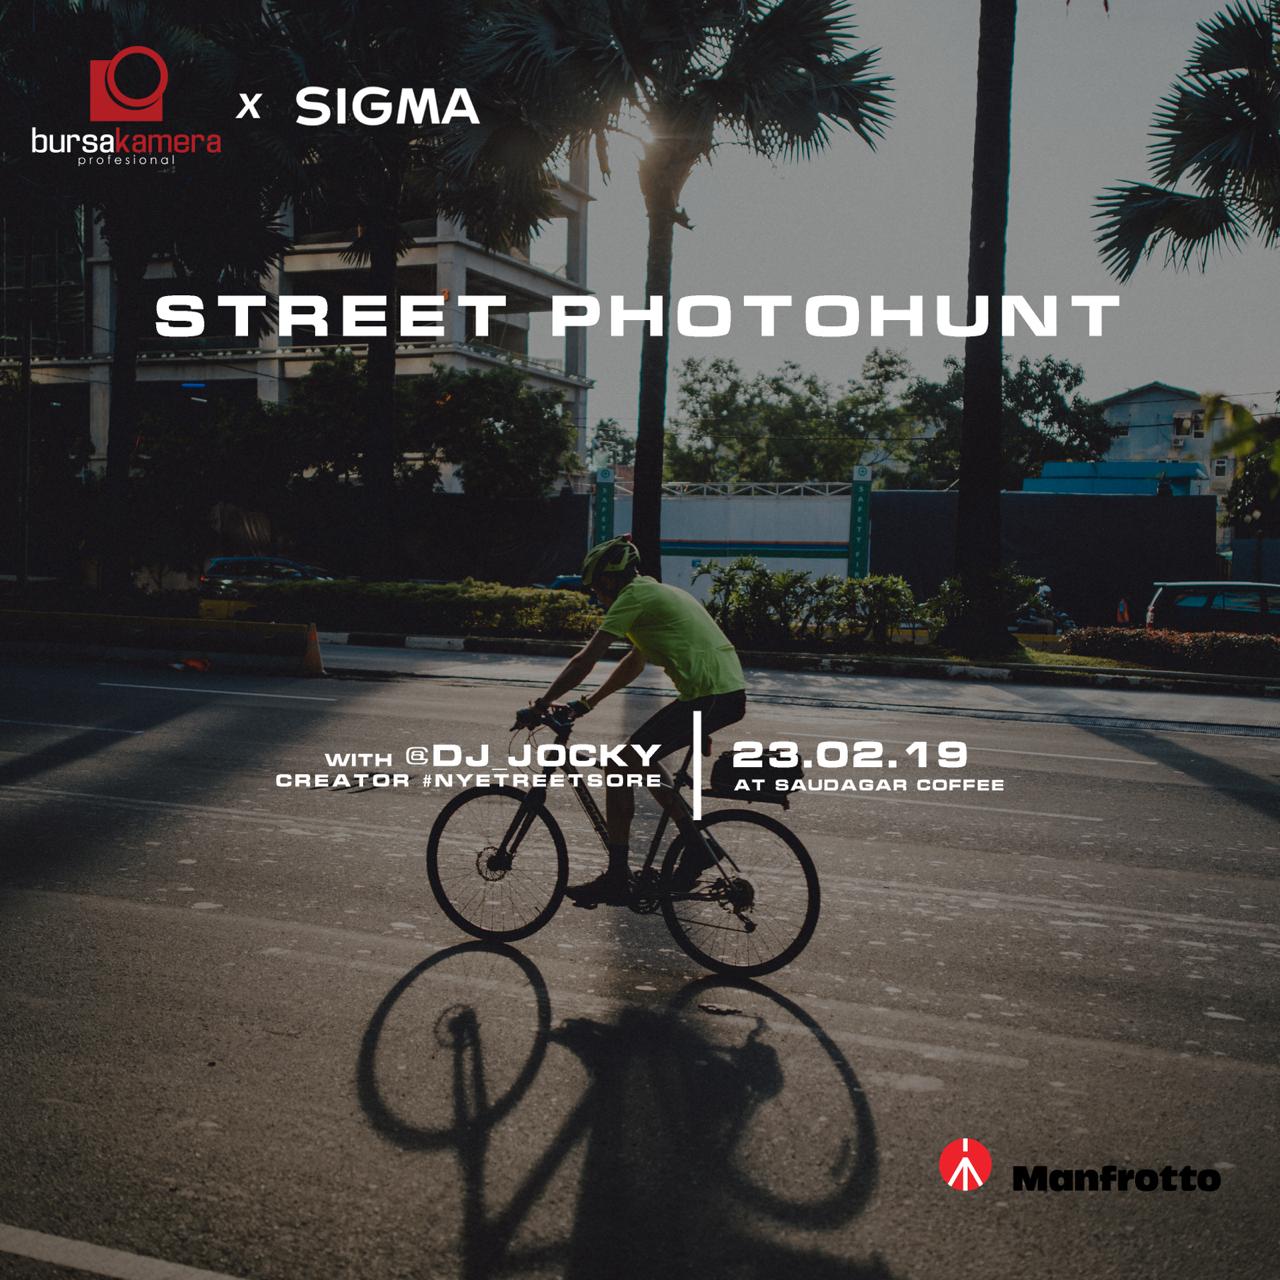 STREET PHOTO HUNT with SIGMA LENS